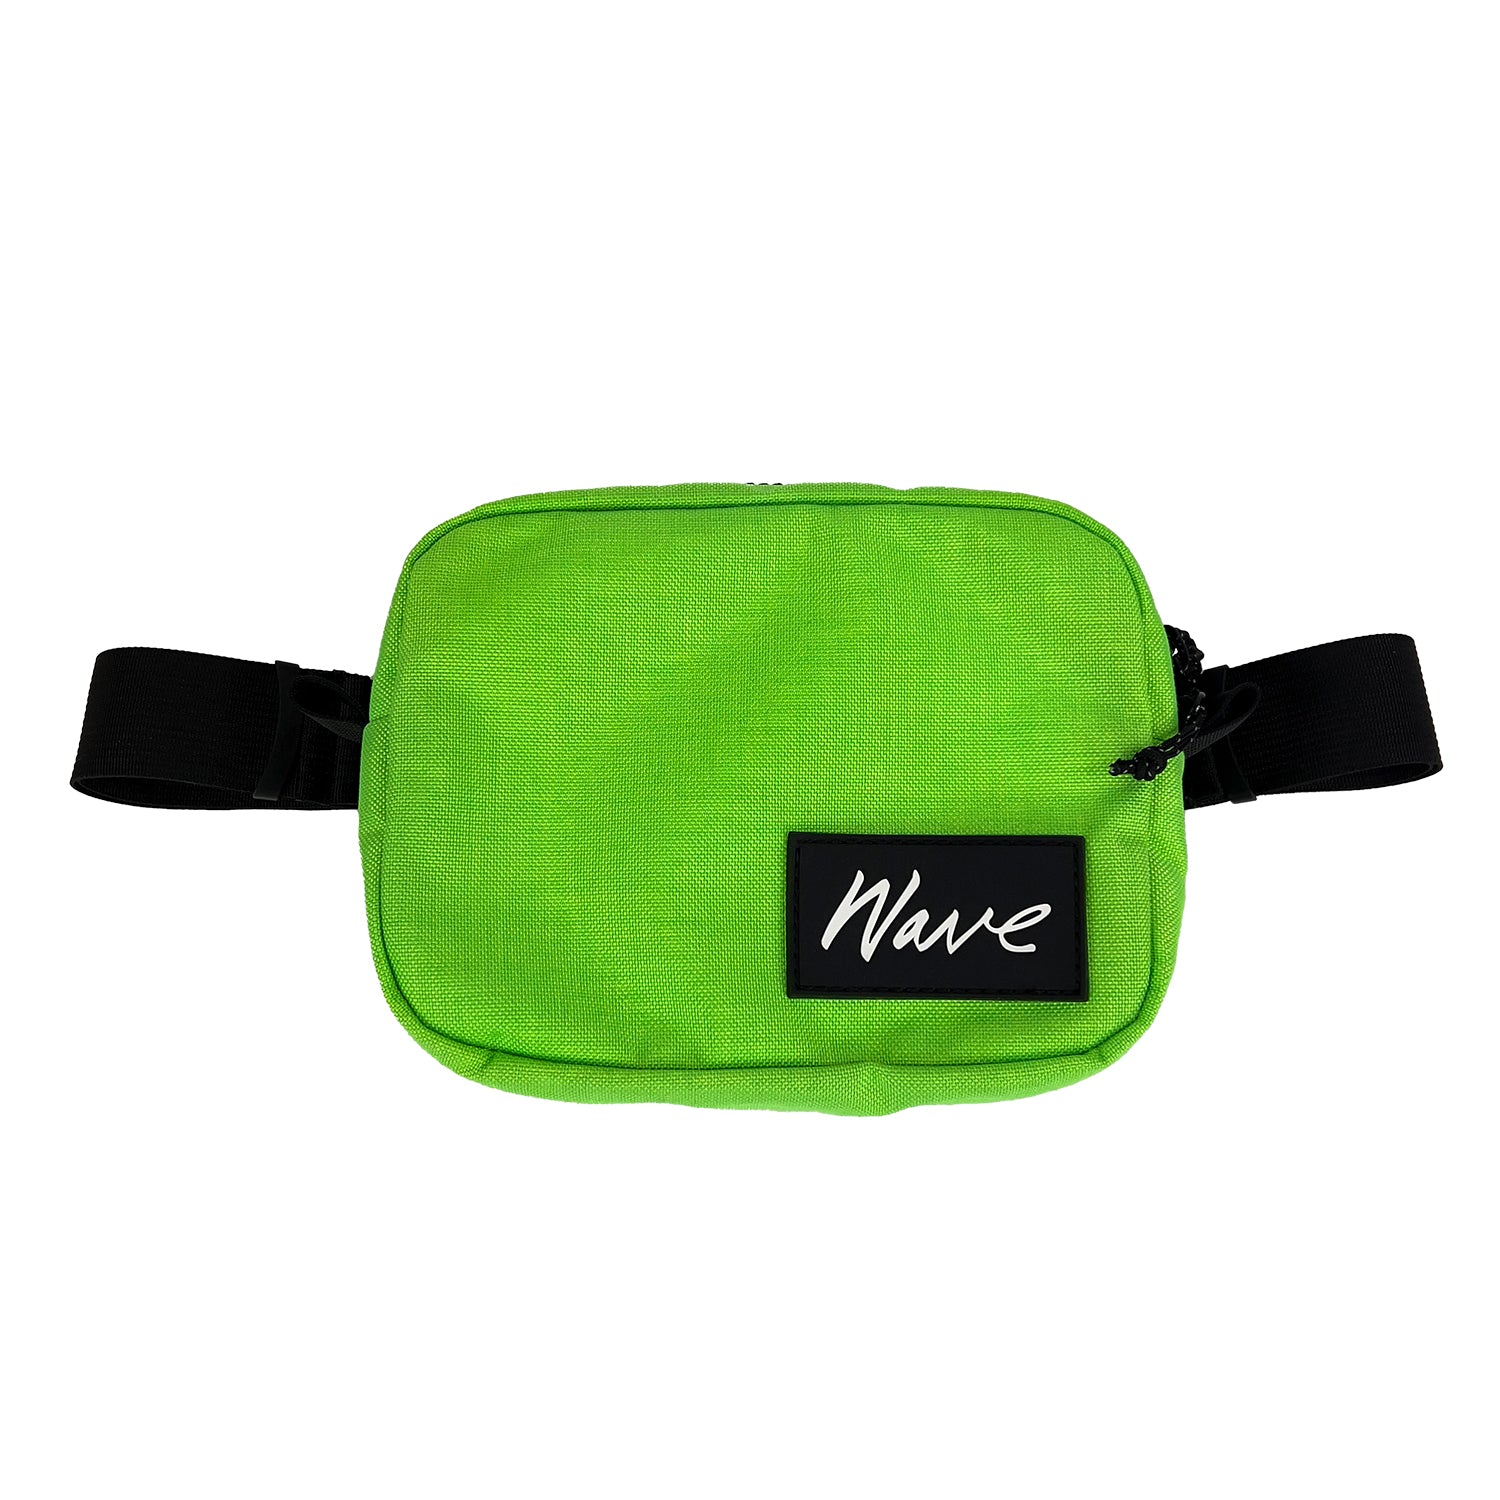 3 Can Fanny Pack